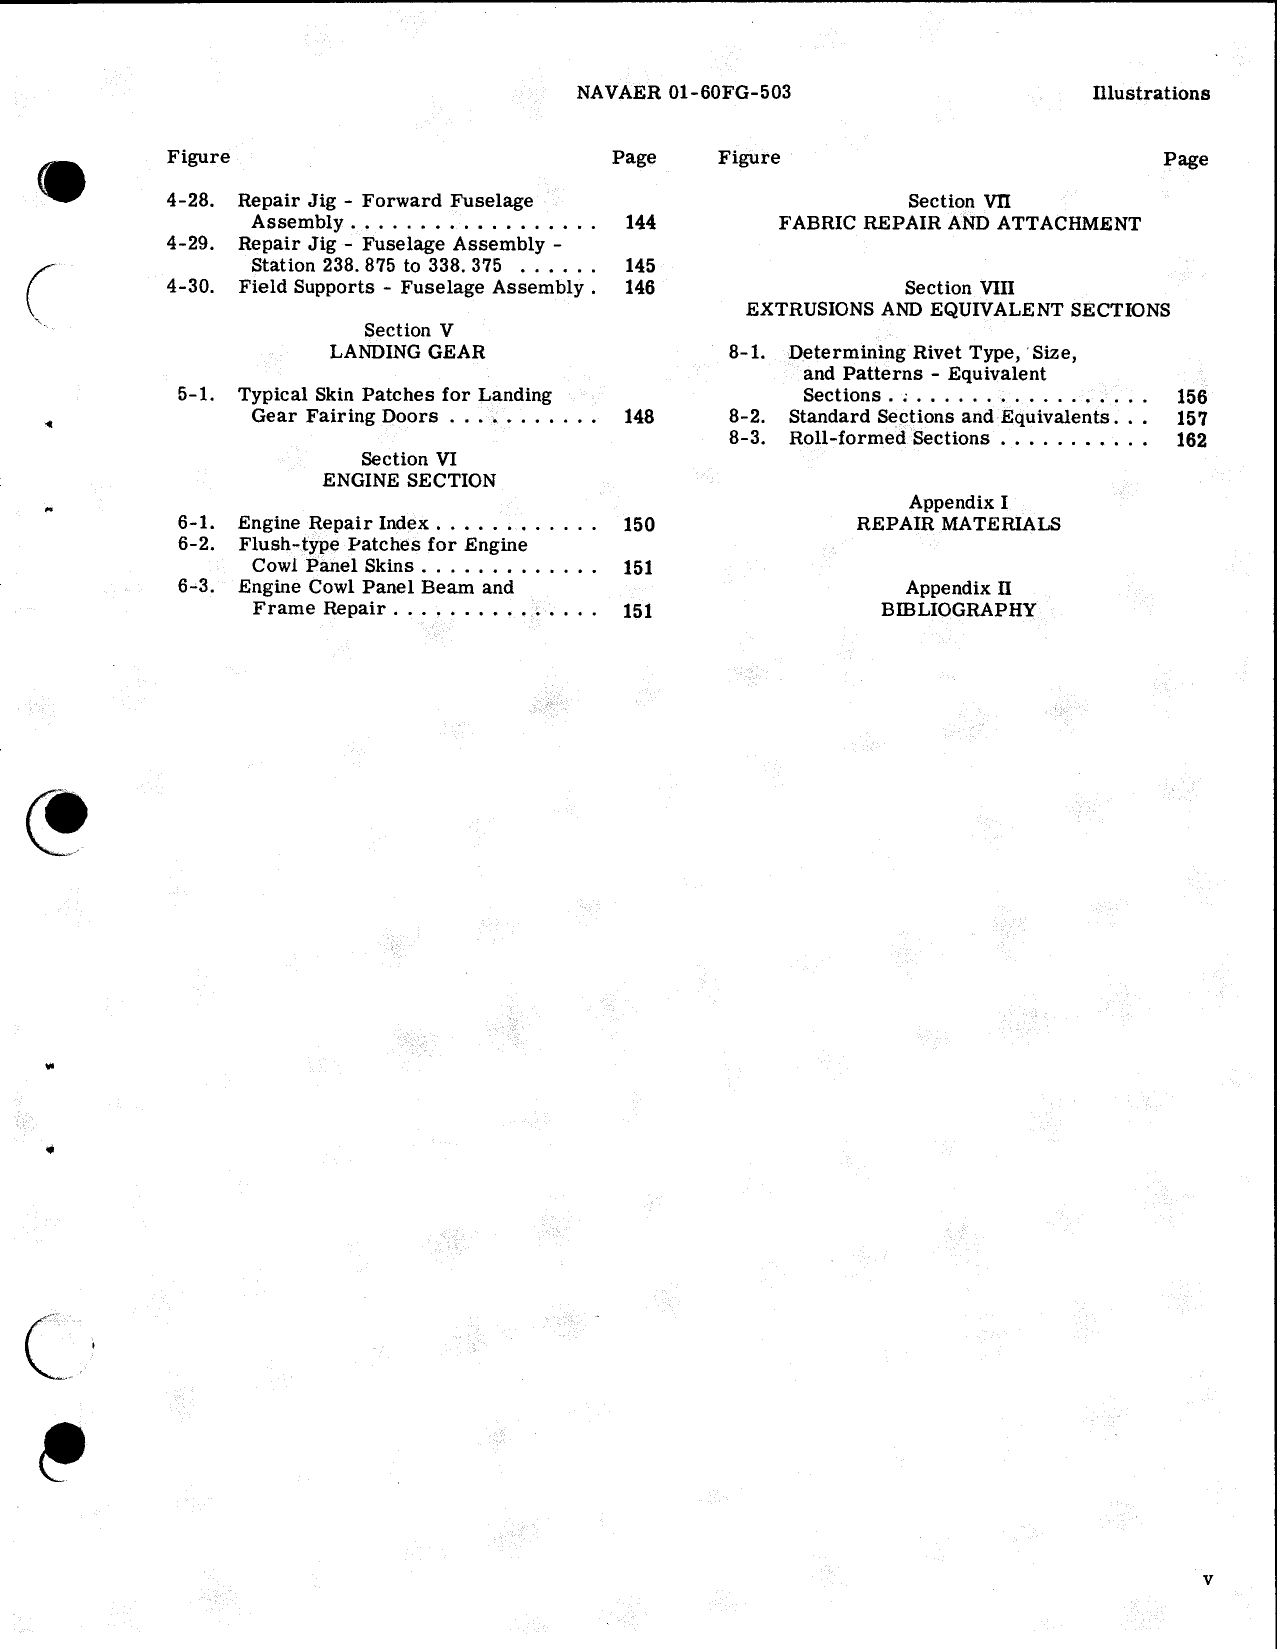 Sample page  7 from AirCorps Library document: Handbook Structural Repair, T-28B T-28C